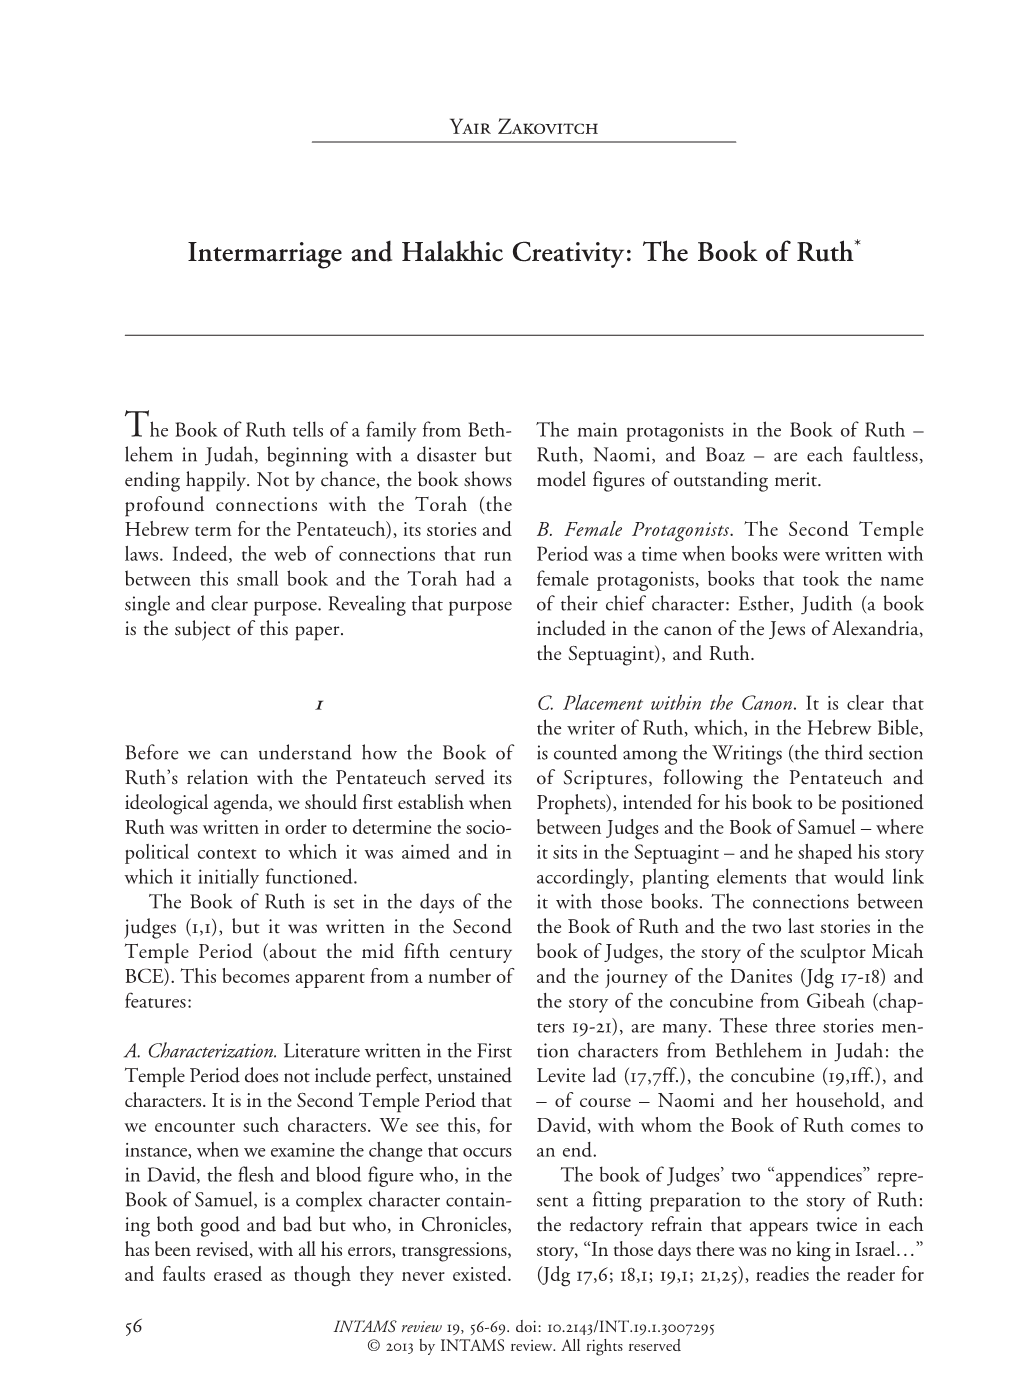 Intermarriage and Halakhic Creativity: the Book of Ruth*